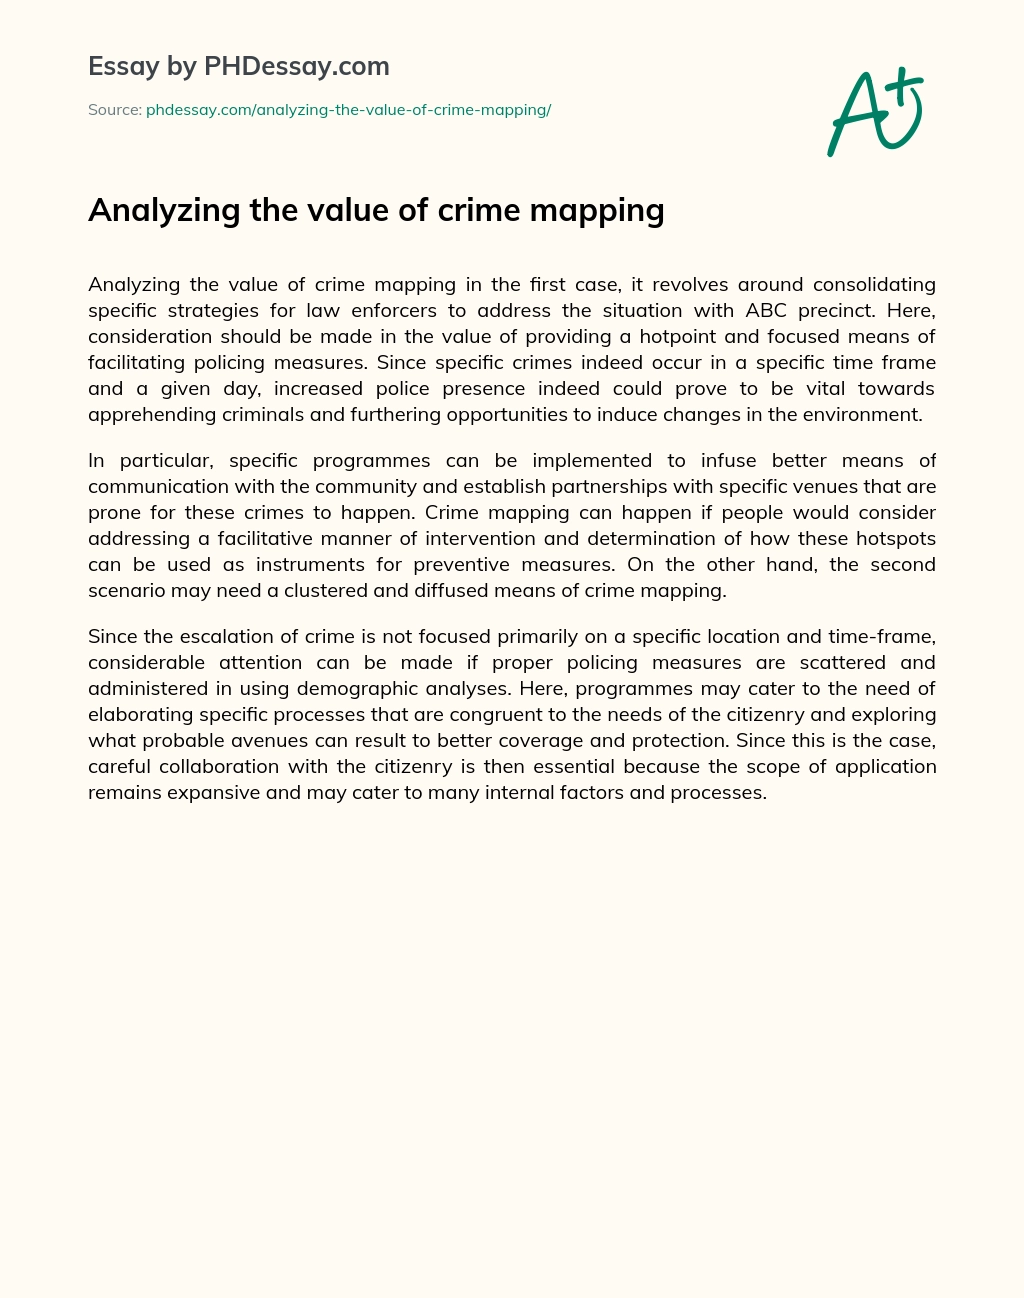 Analyzing the value of crime mapping essay